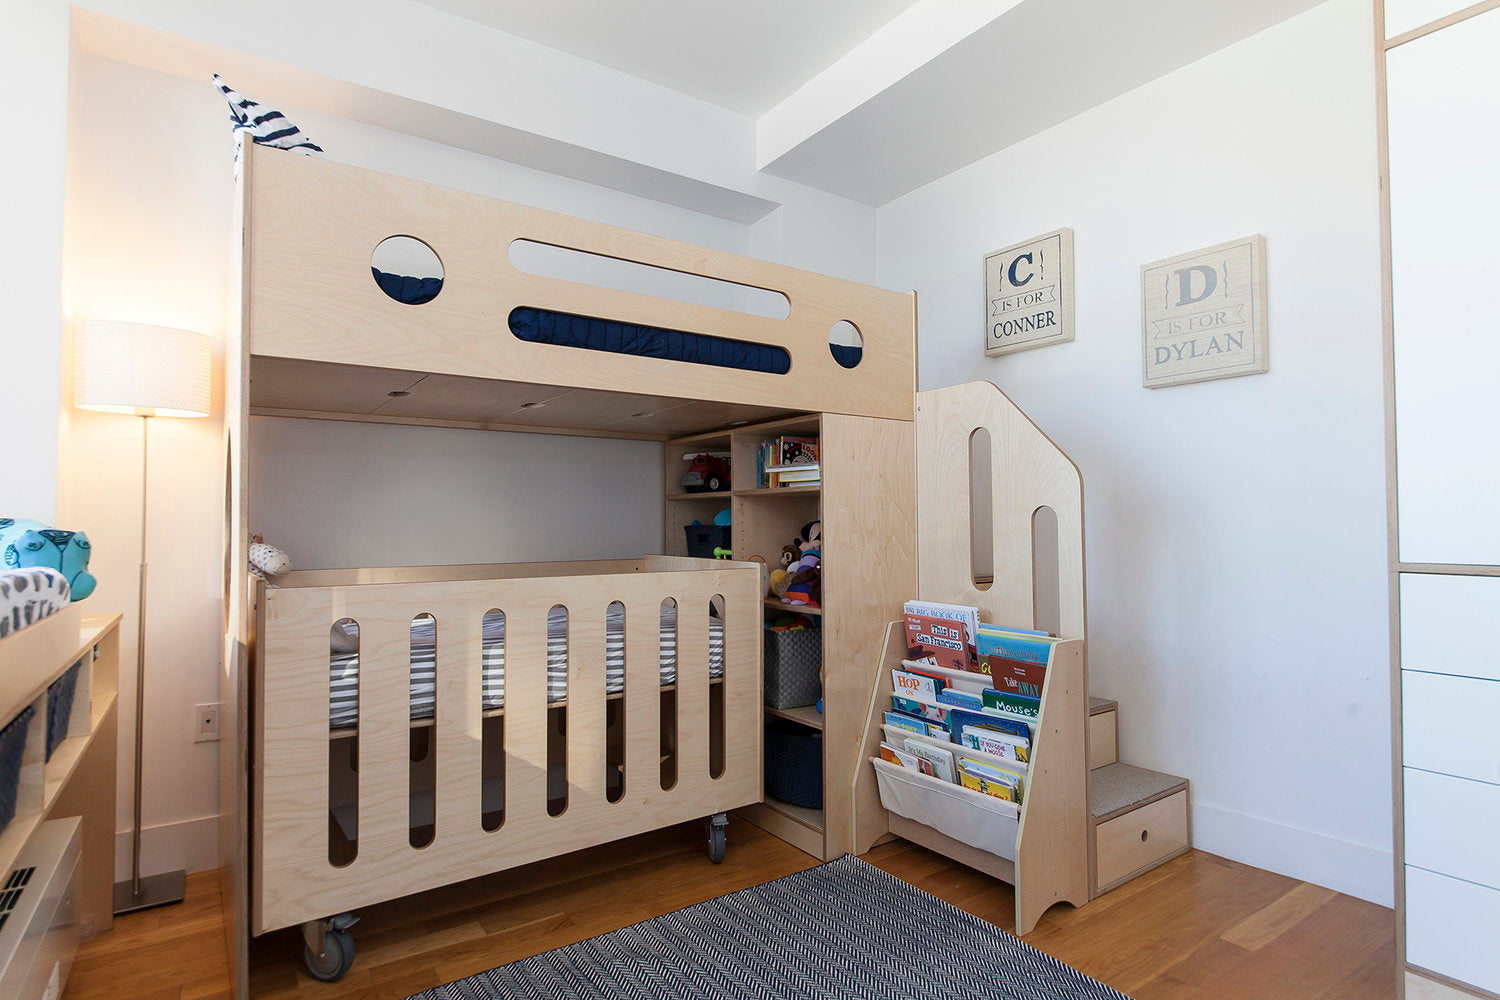 Wooden bunk bed with storage, bookshelf in child’s room named ‘Connor’ and ‘Dylan’.